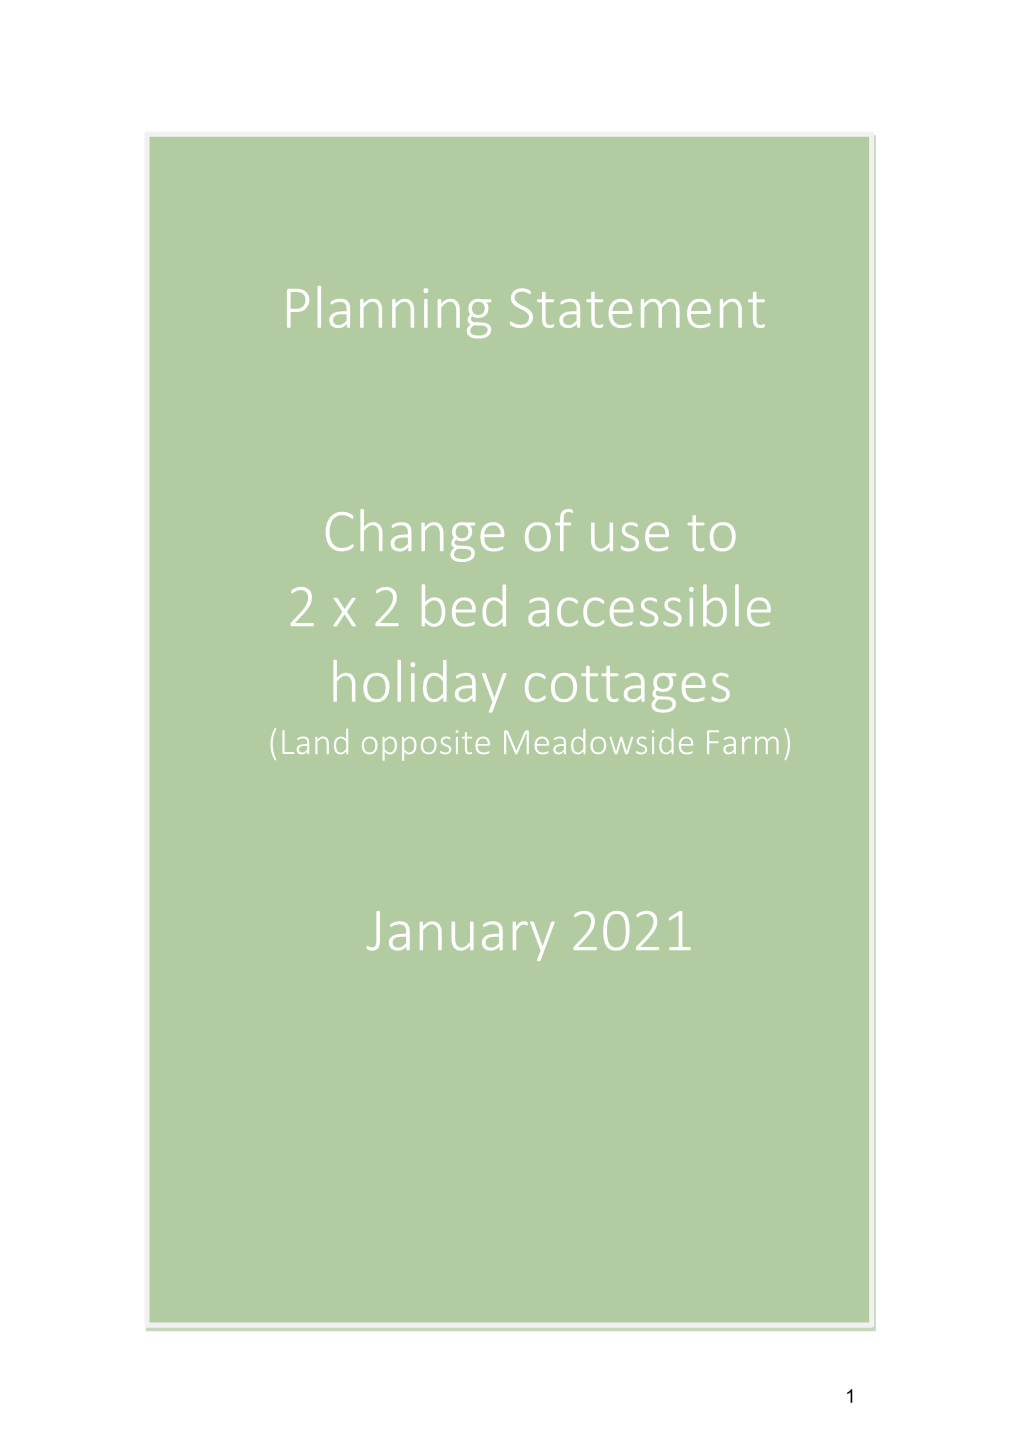 Planning Statement Change of Use to 2 X 2 Bed Accessible Holiday